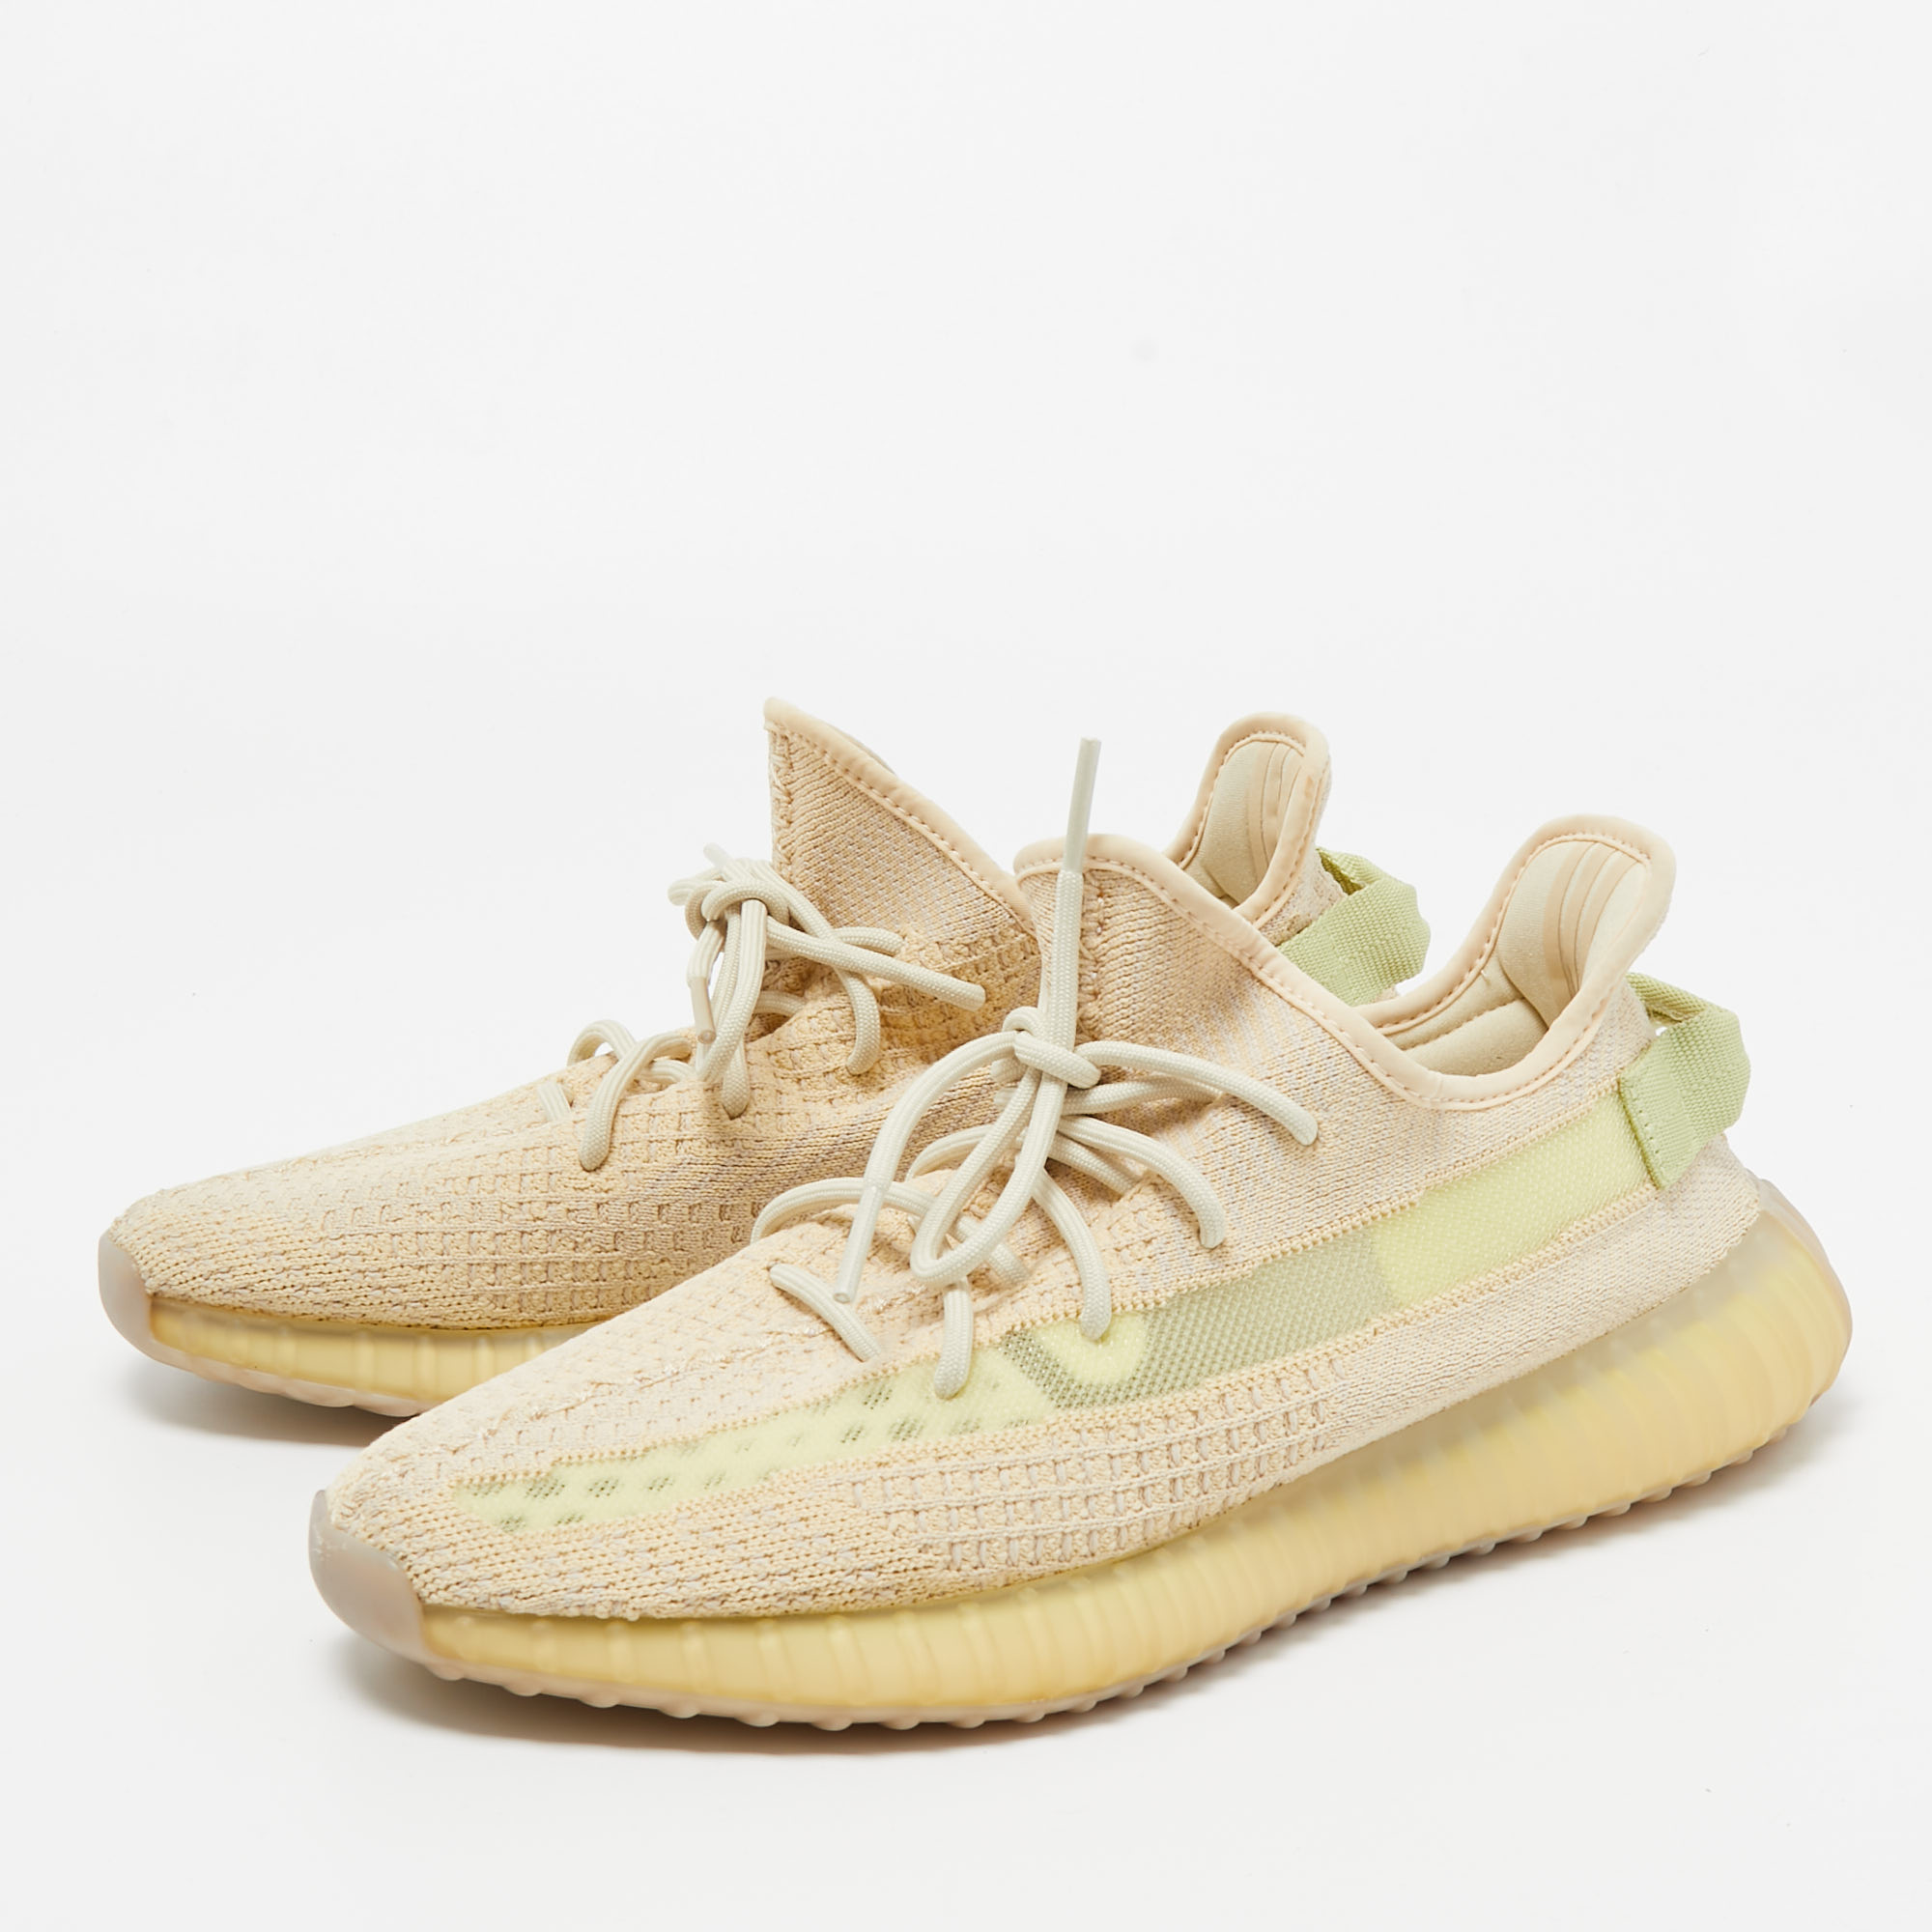 

Yeezy x Adidas Cream Knit Fabric Boost 350 V2-Flax Sneakers Size 44 2/3